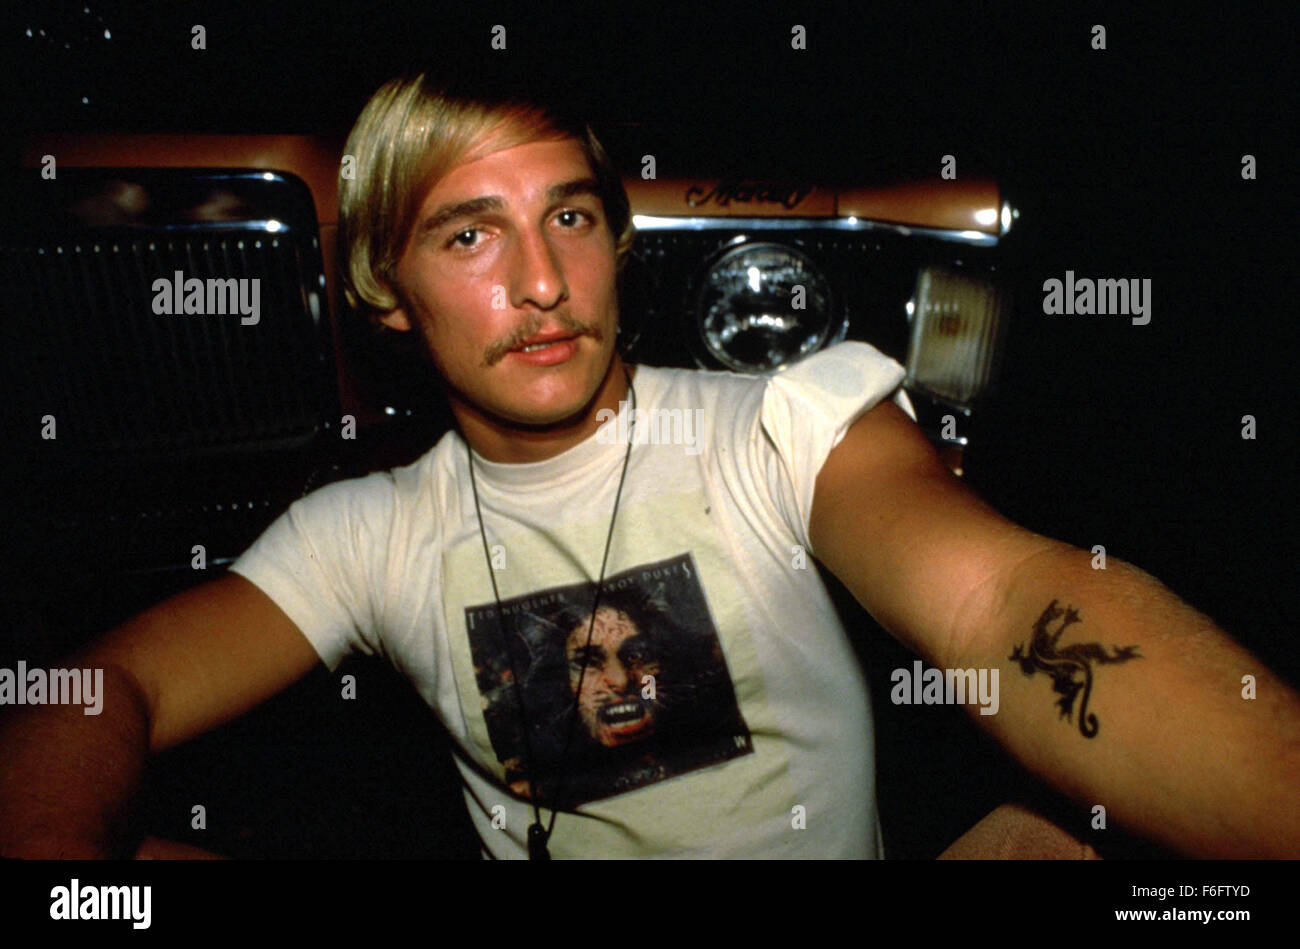 Sep 10, 1993; Austin, TX, USA; MATTHEW MCCONAUGHEY stars as David Wooderson in the comedy drama 'Dazed and Confused' directed by Richard Linklater. Stock Photo